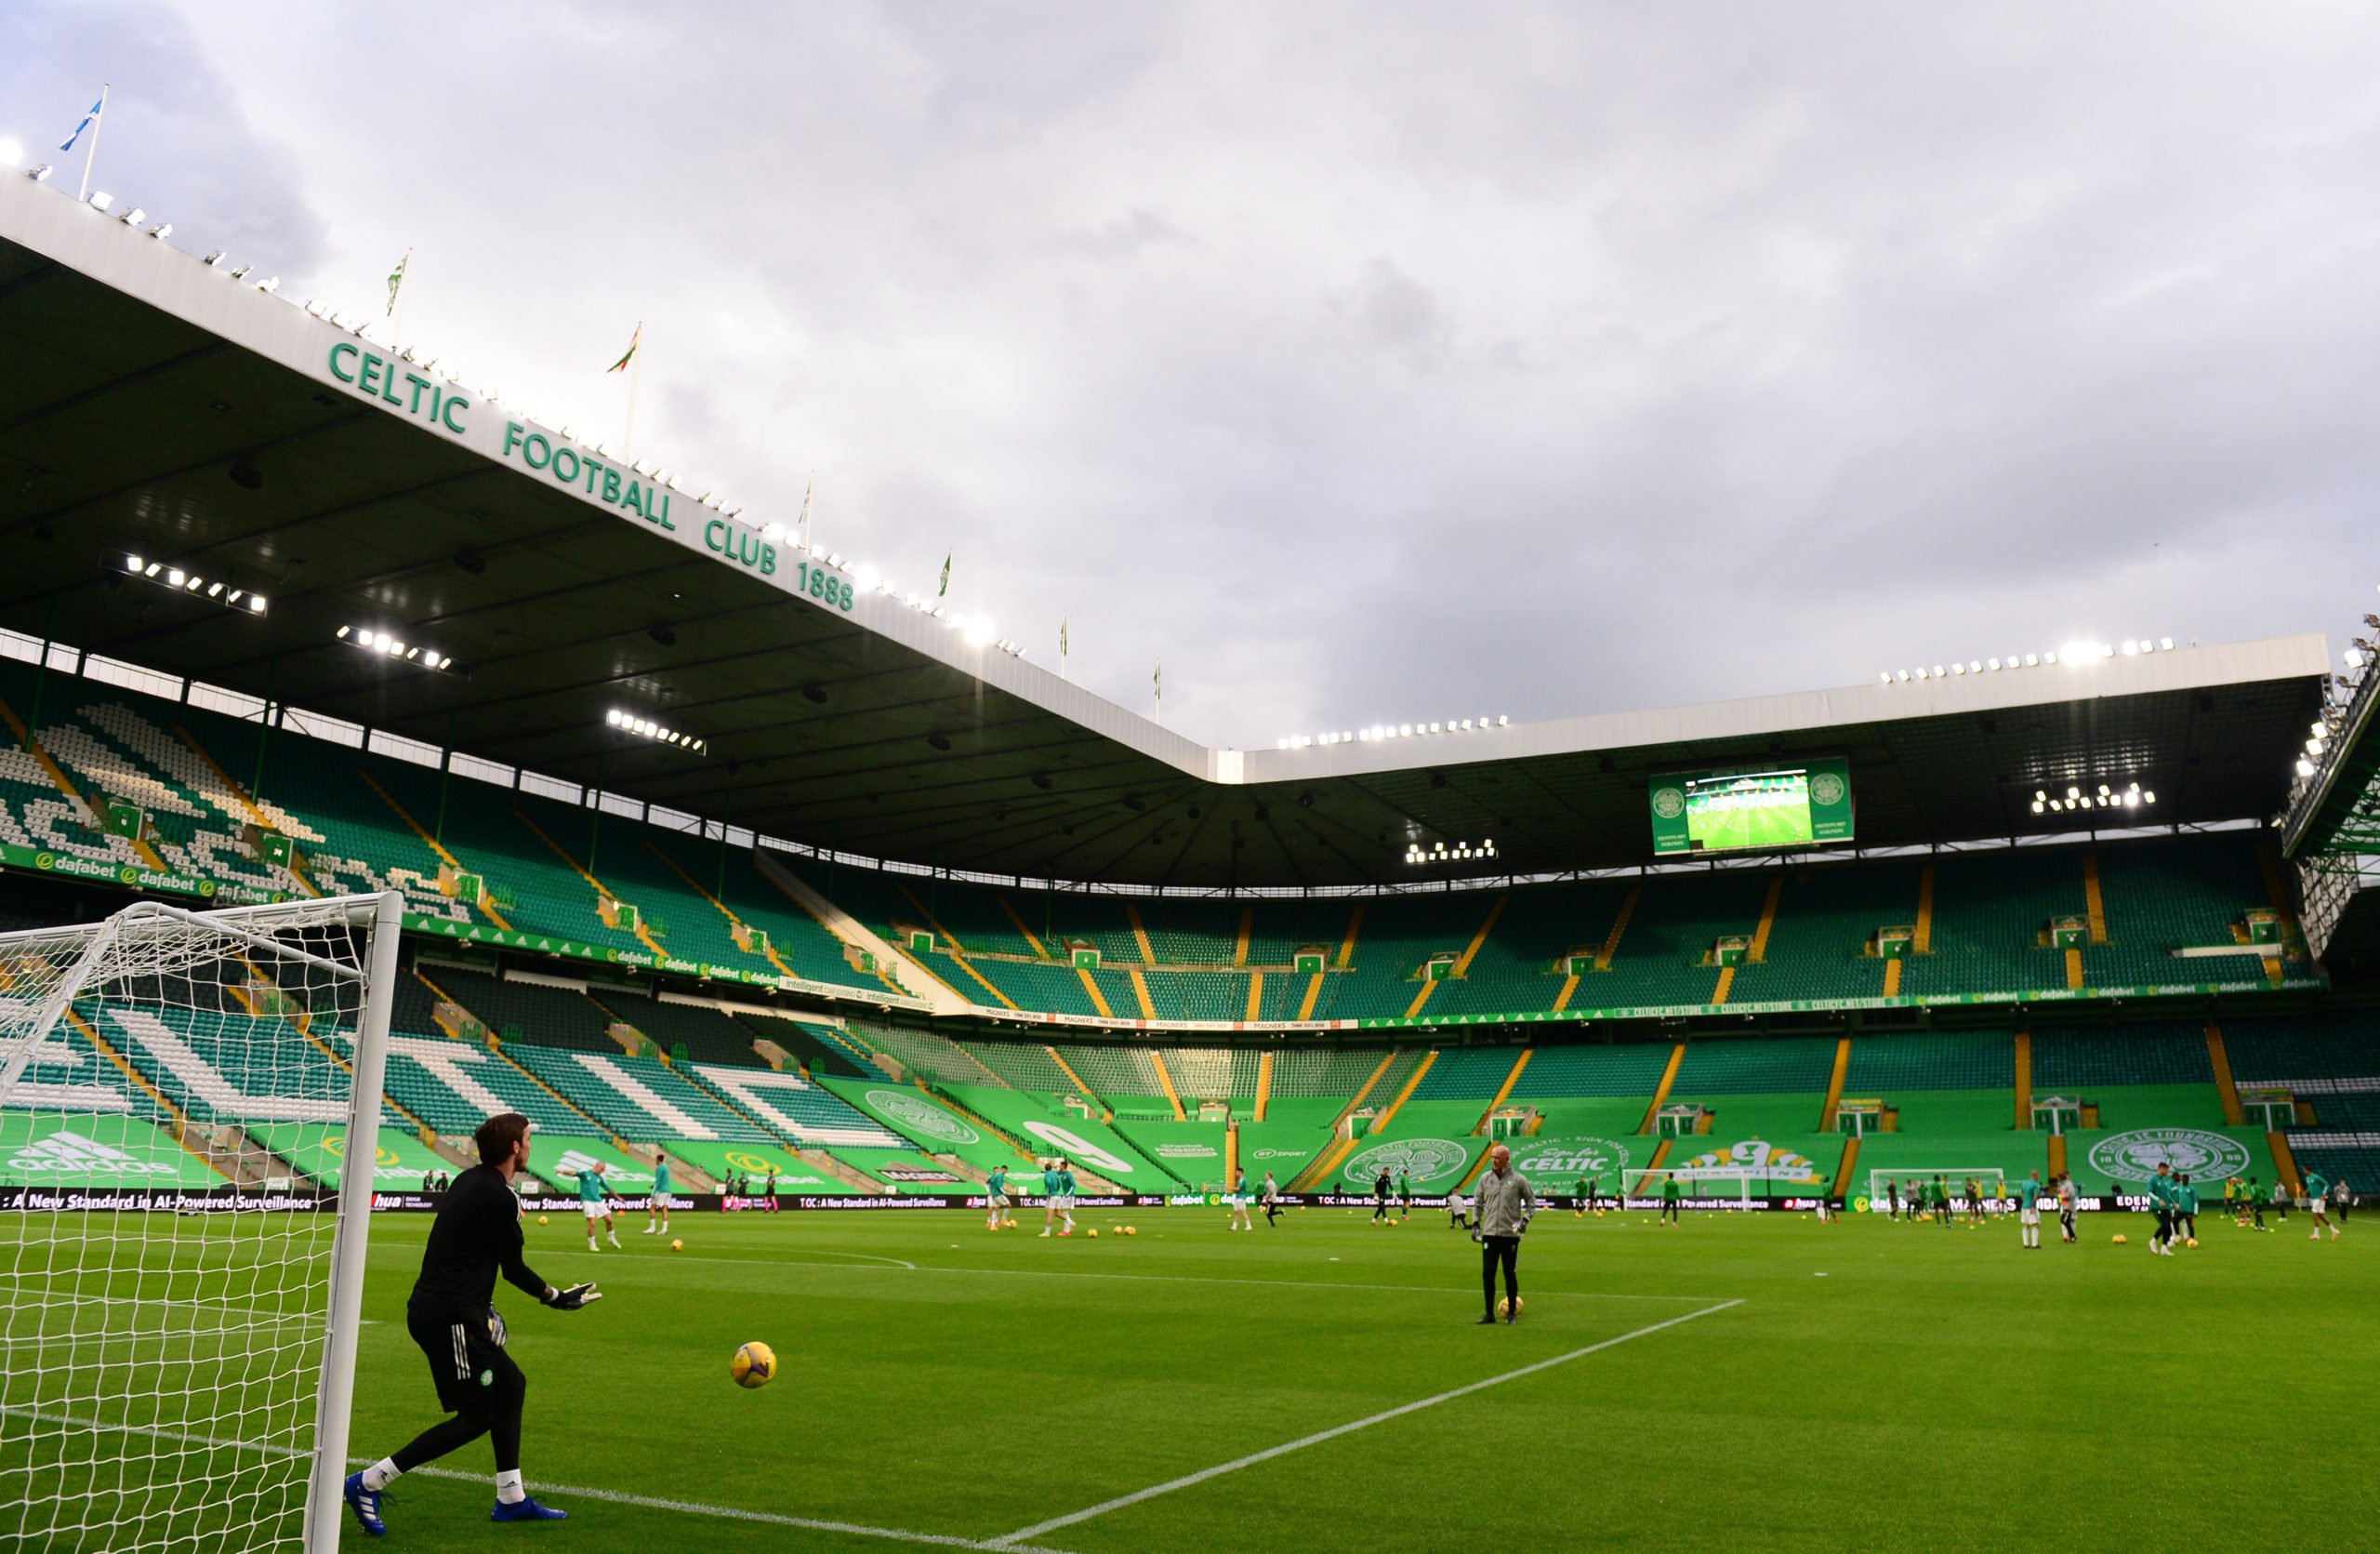 Celtic Park is the venue for the first Glasgow derby of the season